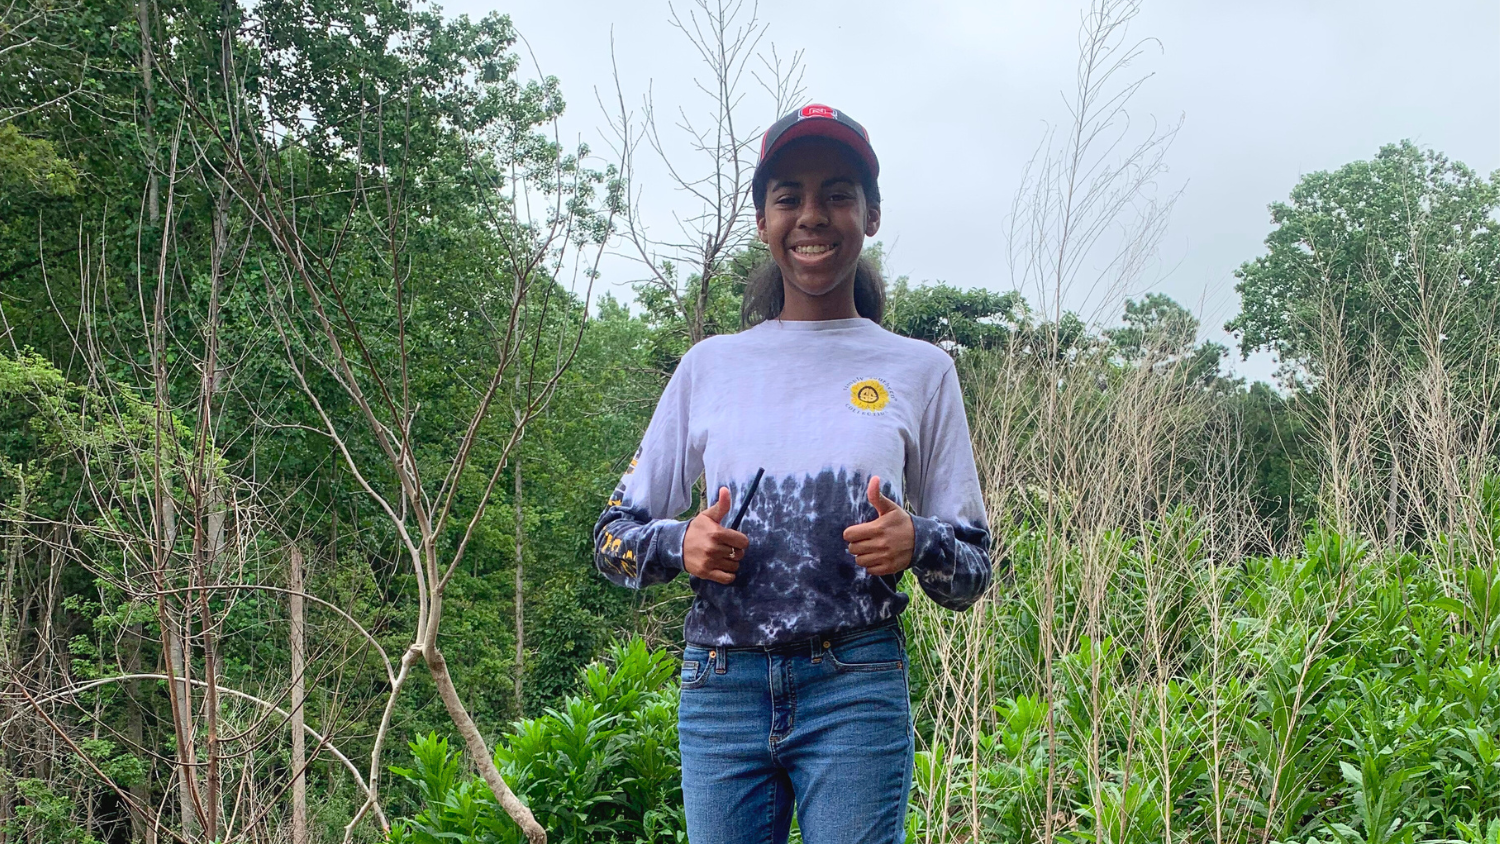 Student gives thumbs up in the field - CNR High School Summer Research Program - Forestry and Environmental Resources at NC State University